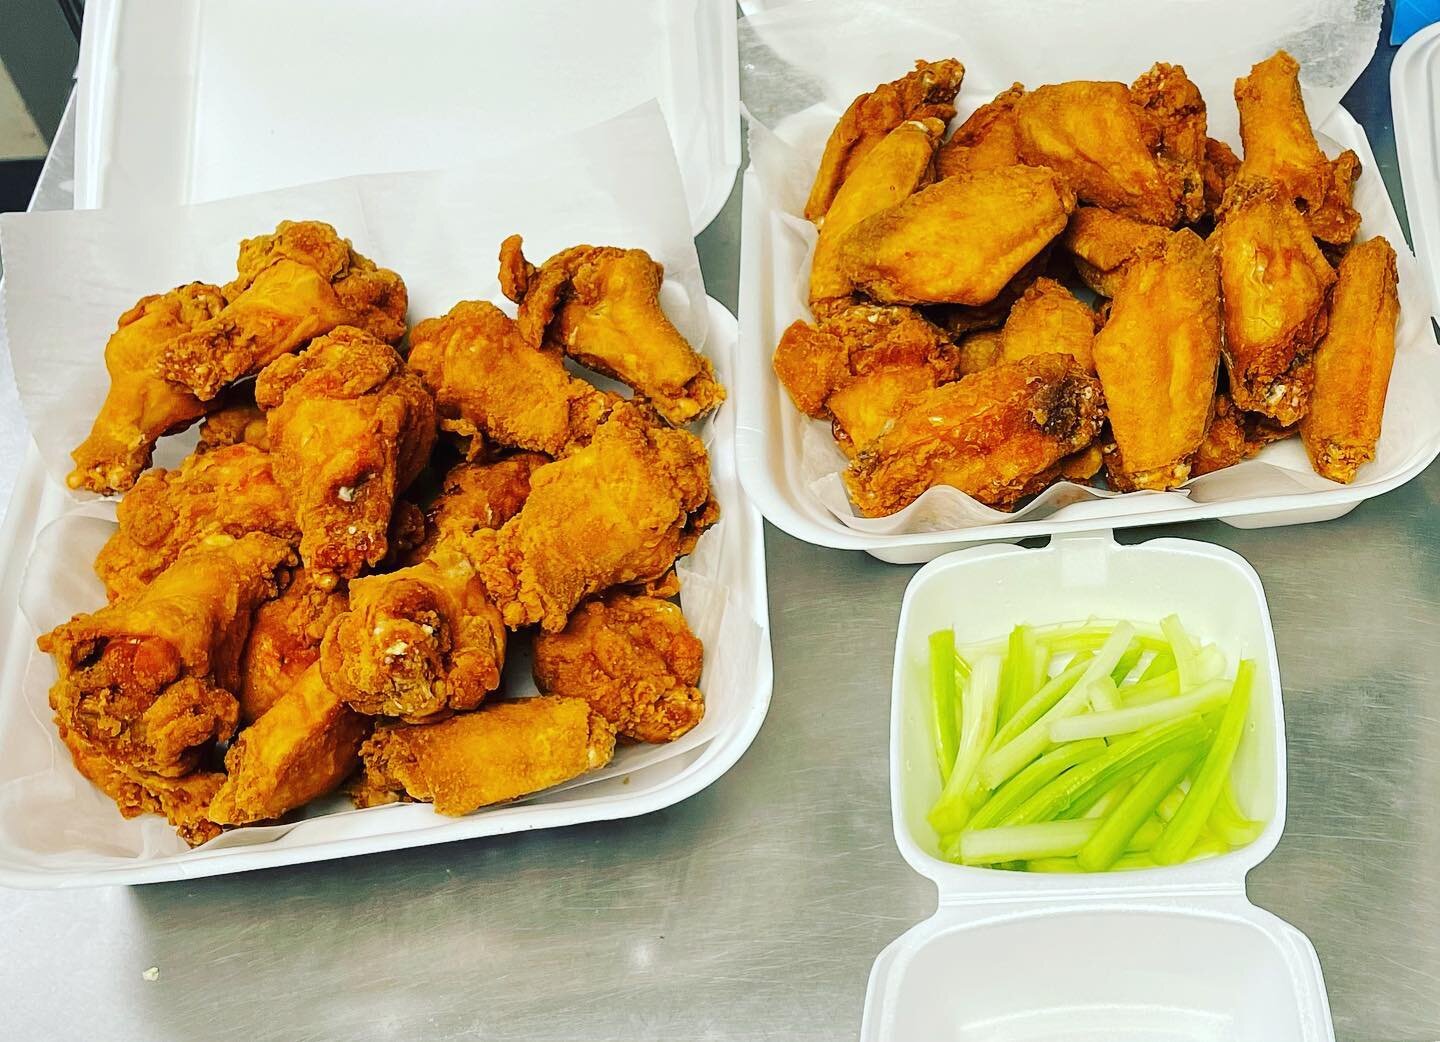 We bring the wings at Hercules Pizza! Get your wings in sizes of 6, 12, 20, 35, and 60 in any of our 10 flavor choices!